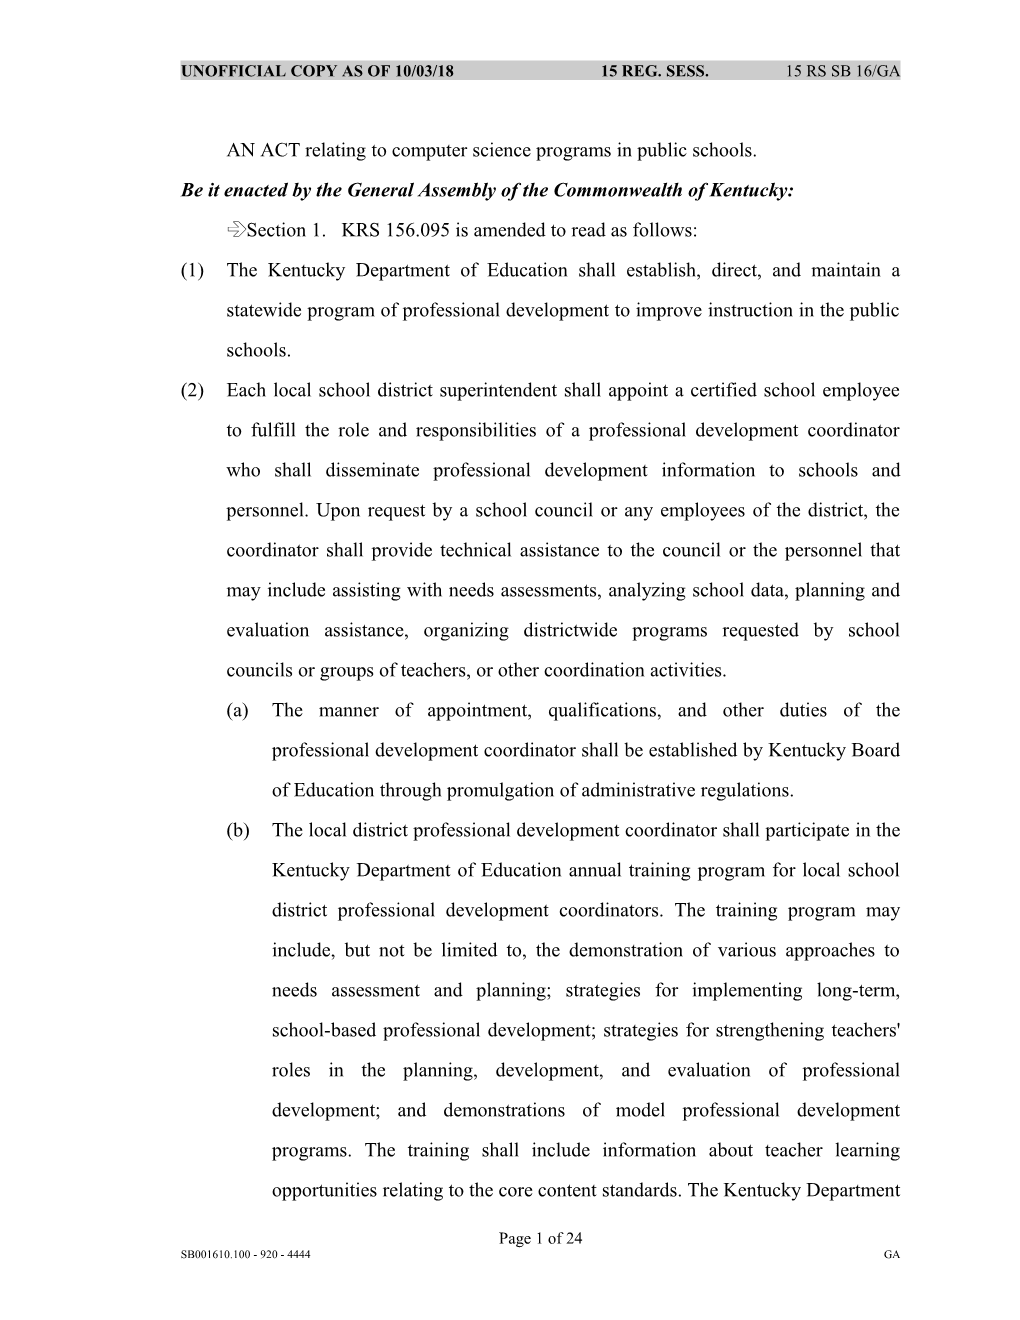 AN ACT Relating to Computer Science Programs in Public Schools